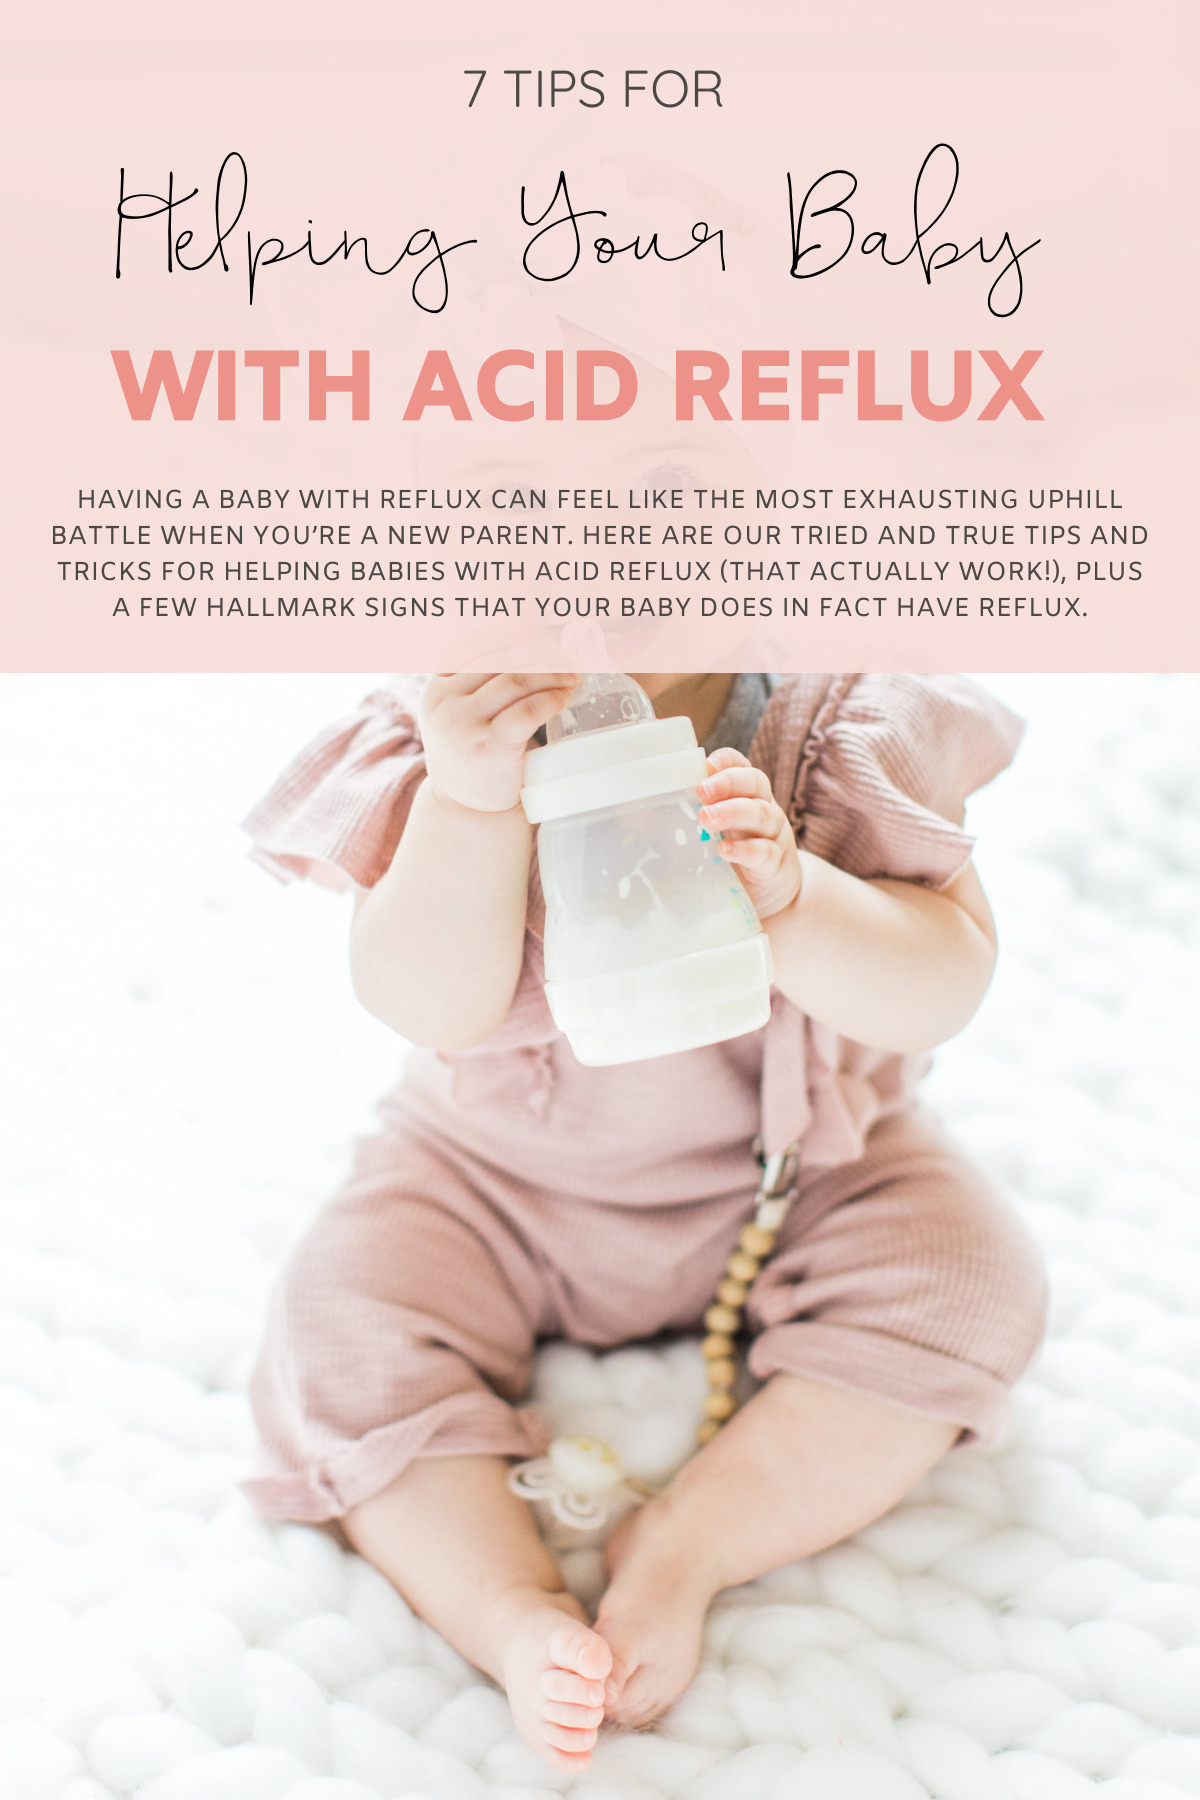 Having a baby with acid reflux can feel like the most exhausting uphill battle when you’re a new parent. Having had two babies who both suffered from acid reflux, and after talking to countless doctors and fellow reflux families, we came up with a list of 7 tips and tricks for helping babies with acid reflux (that actually work!), plus a few hallmark signs that your baby does in fact have reflux.